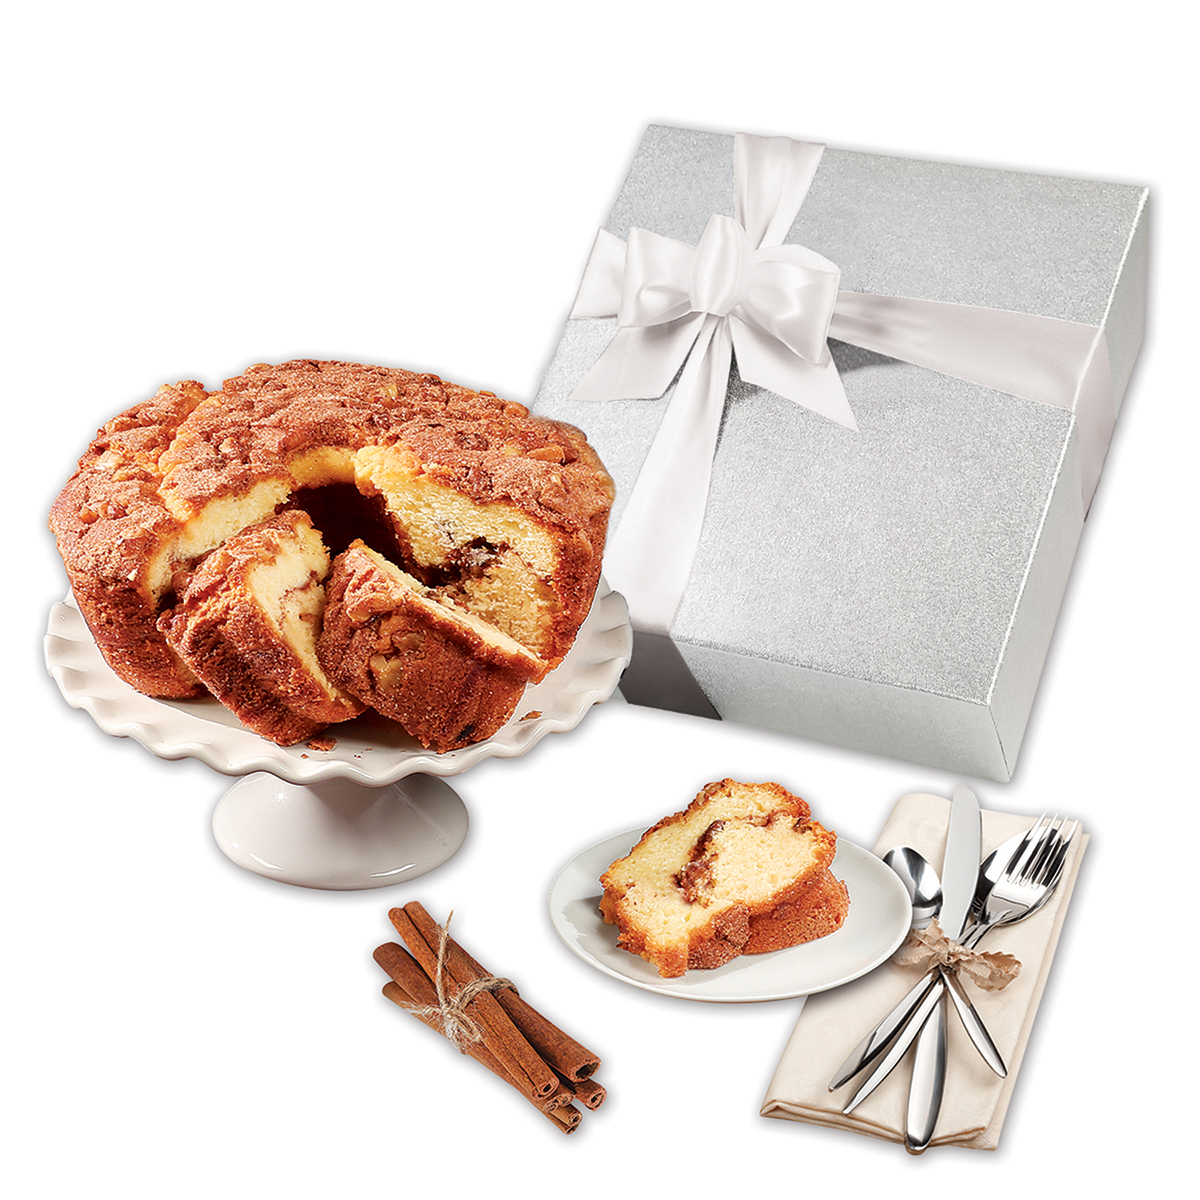 Struggling to connect with your remote clients and employees? Surprise them with this Cinnamon Walnut Gourmet Coffee Cake, include a gift card.
Four out of four of these taste testers approve. adworkspromo.com/:quicksearch.h… #foodgifts #corporatgifts #holidaygifts